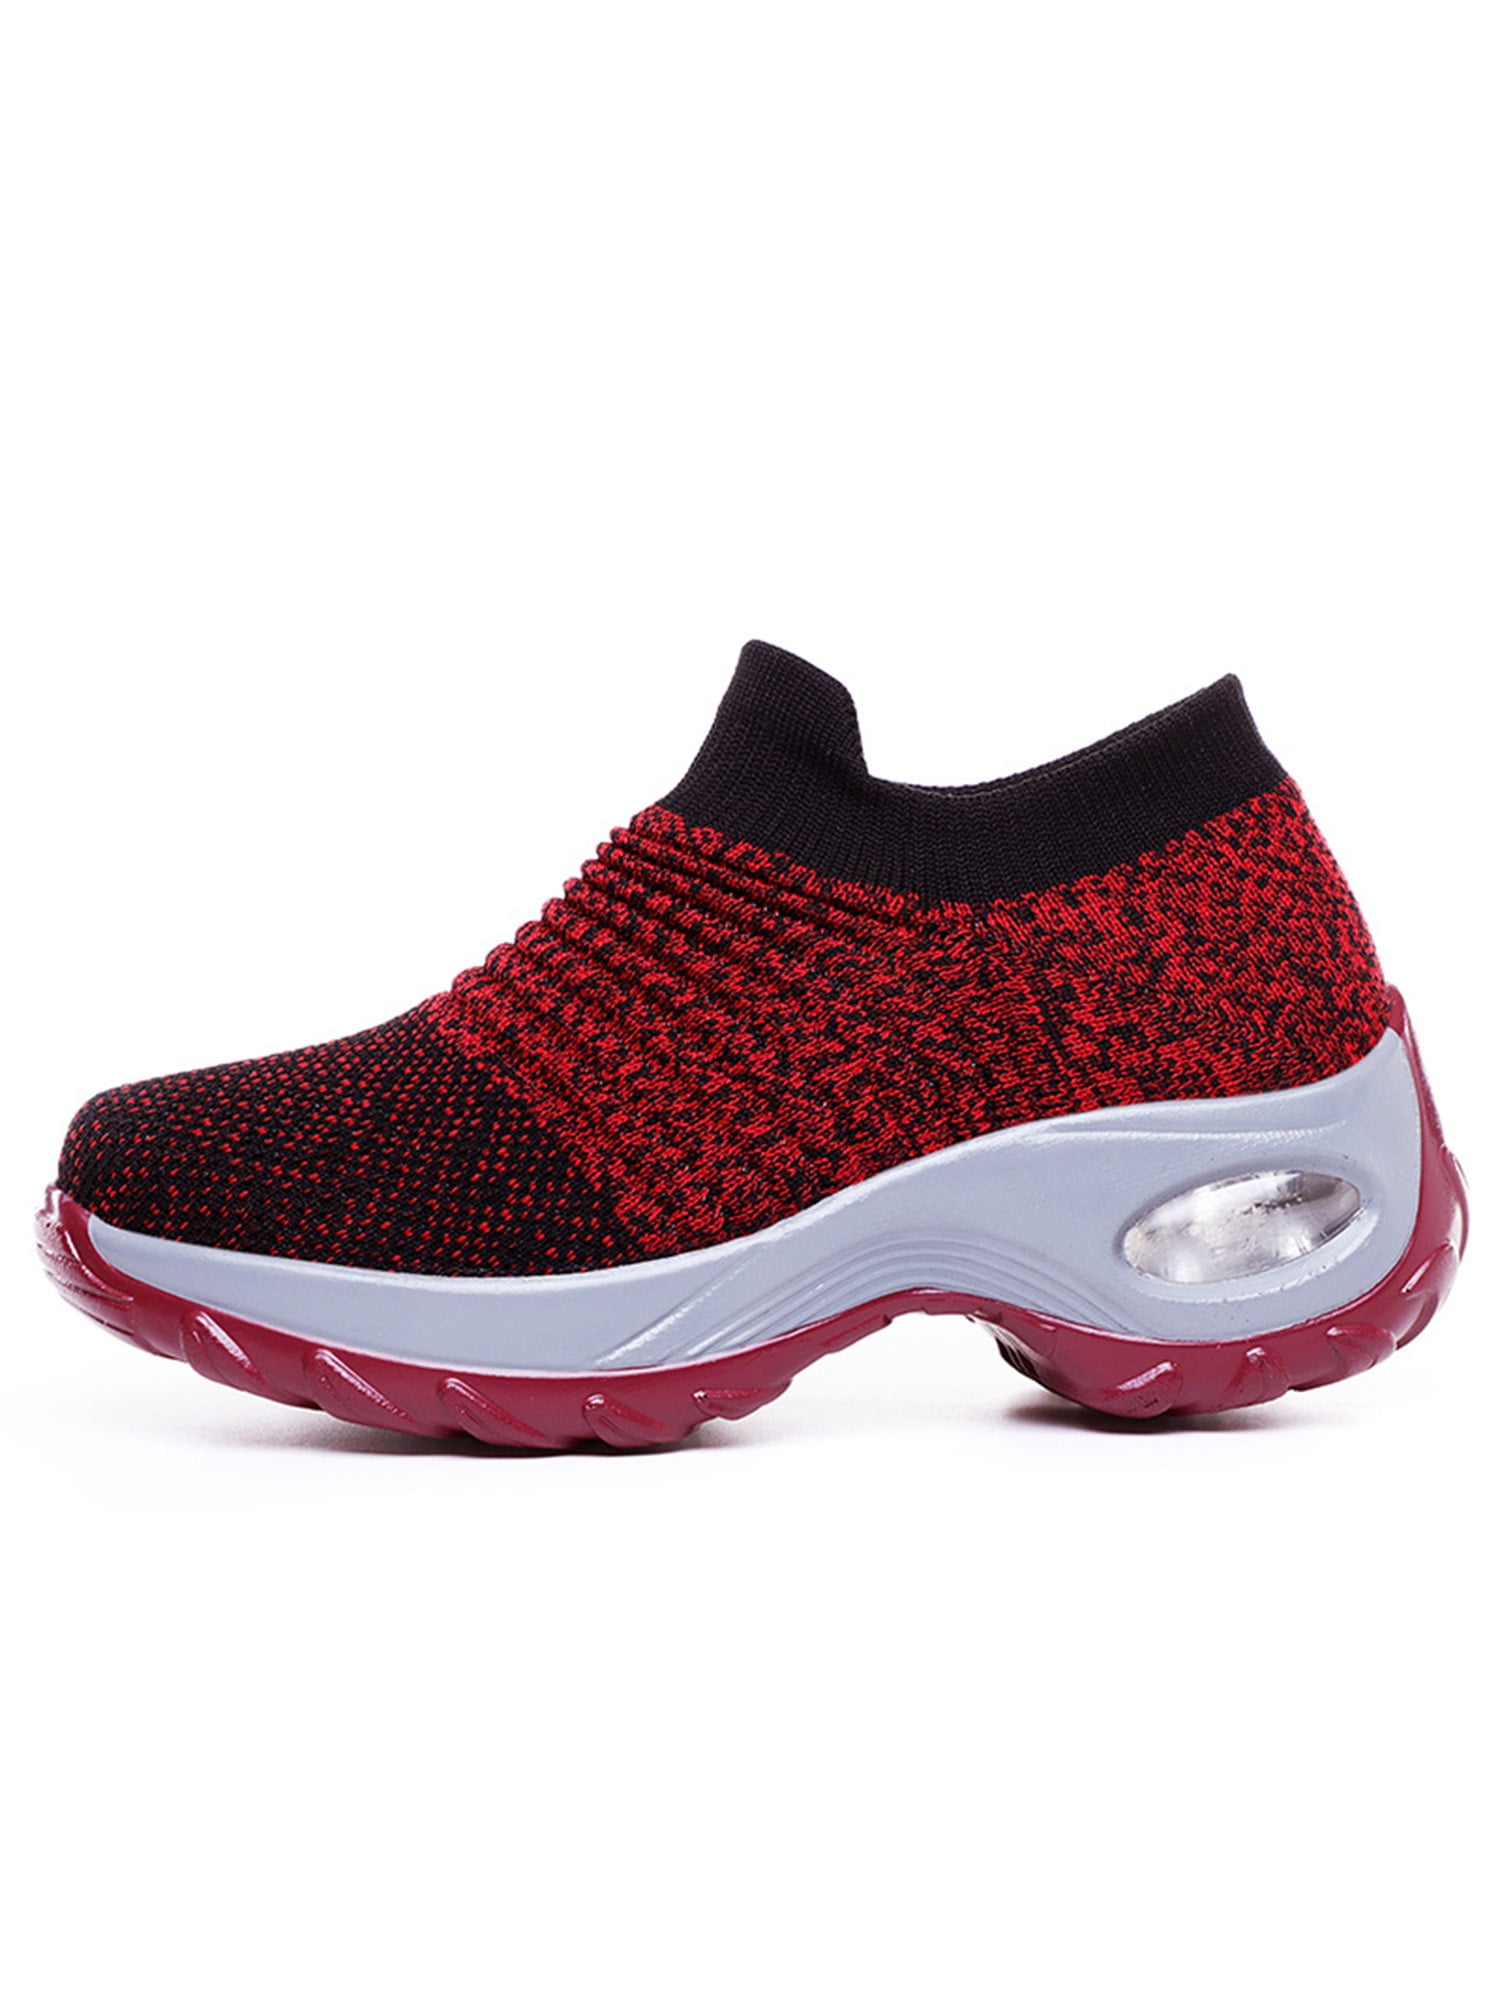 Women's Air Cushion Slip-On Shoes Sport Running Mesh Breathable Walking Sneakers